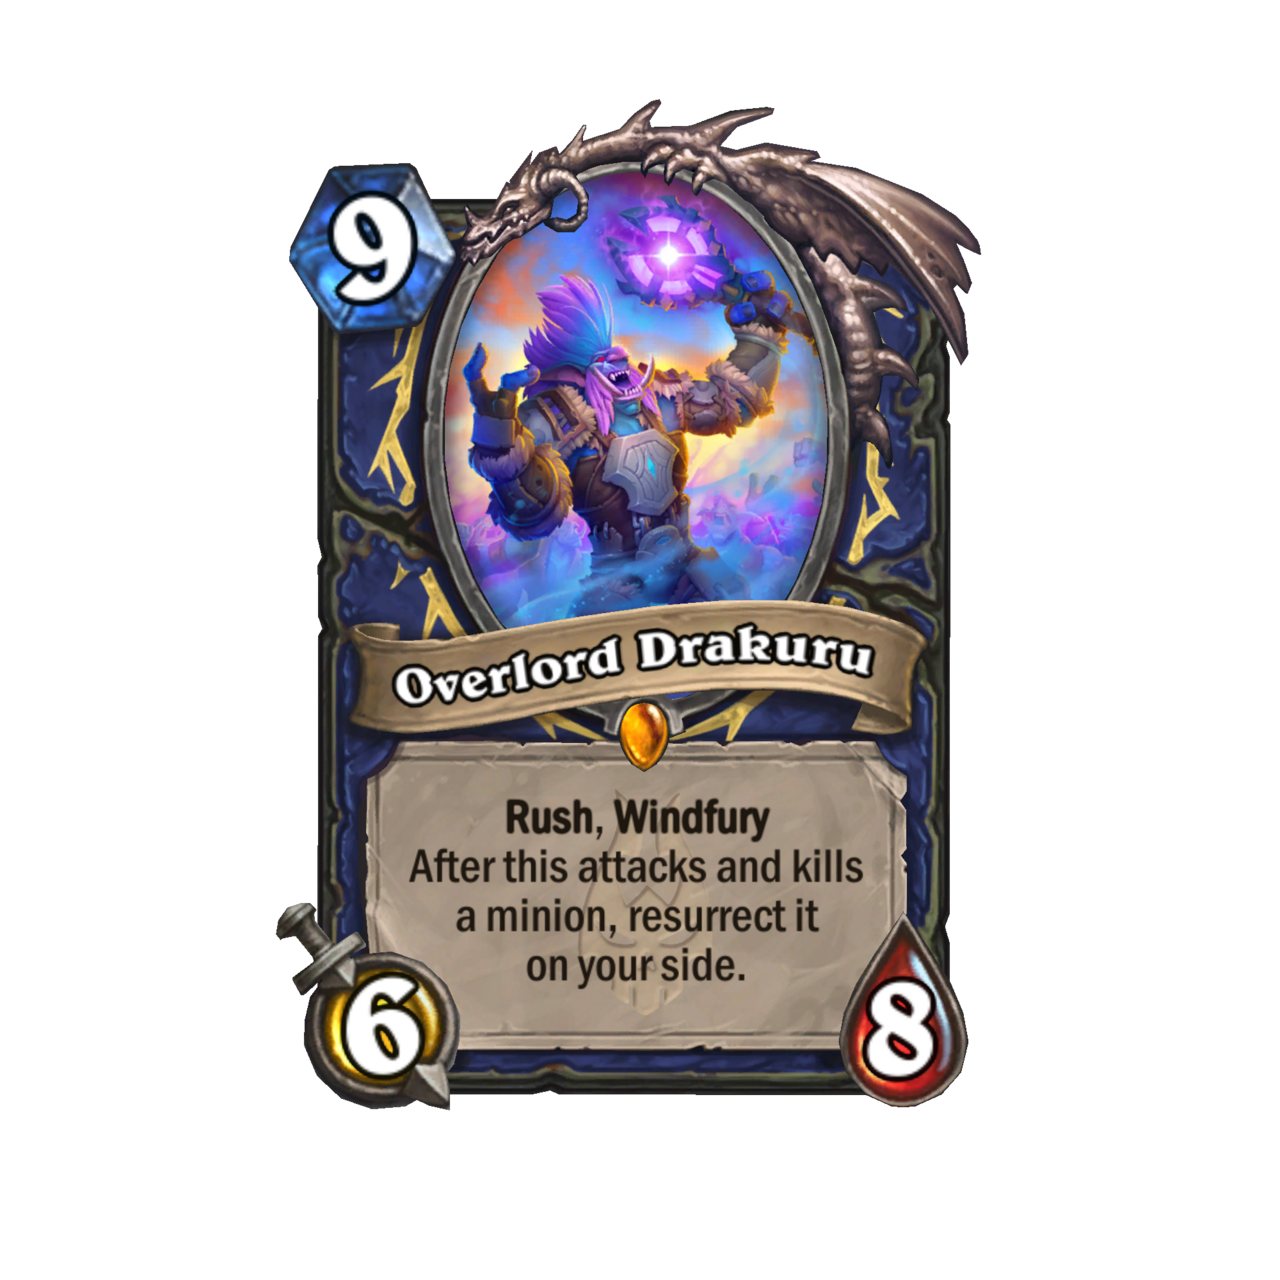 Overlord Drakuru - Rush, Windfury.  After this attacks and kills a minion, bring it back to life on your side.